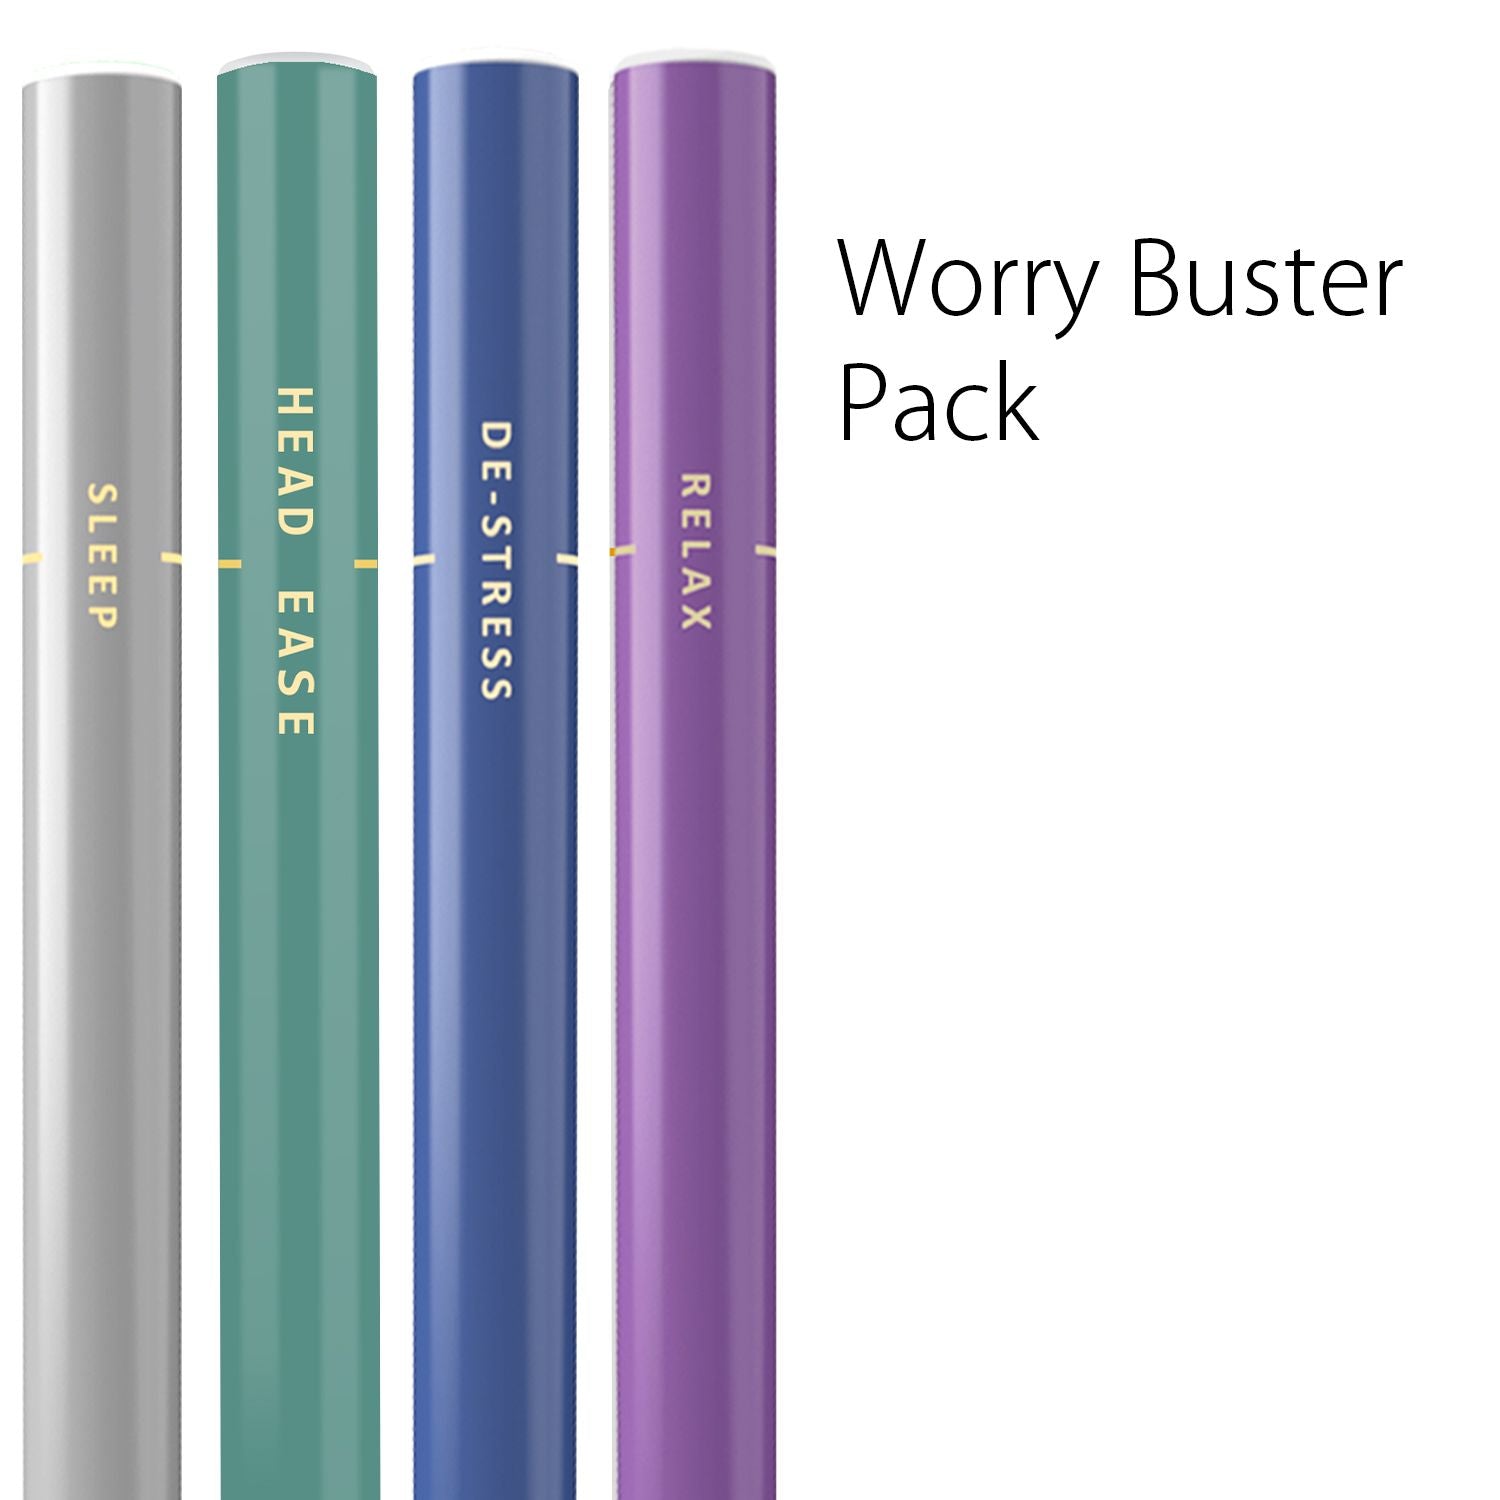 Worry Buster Pack